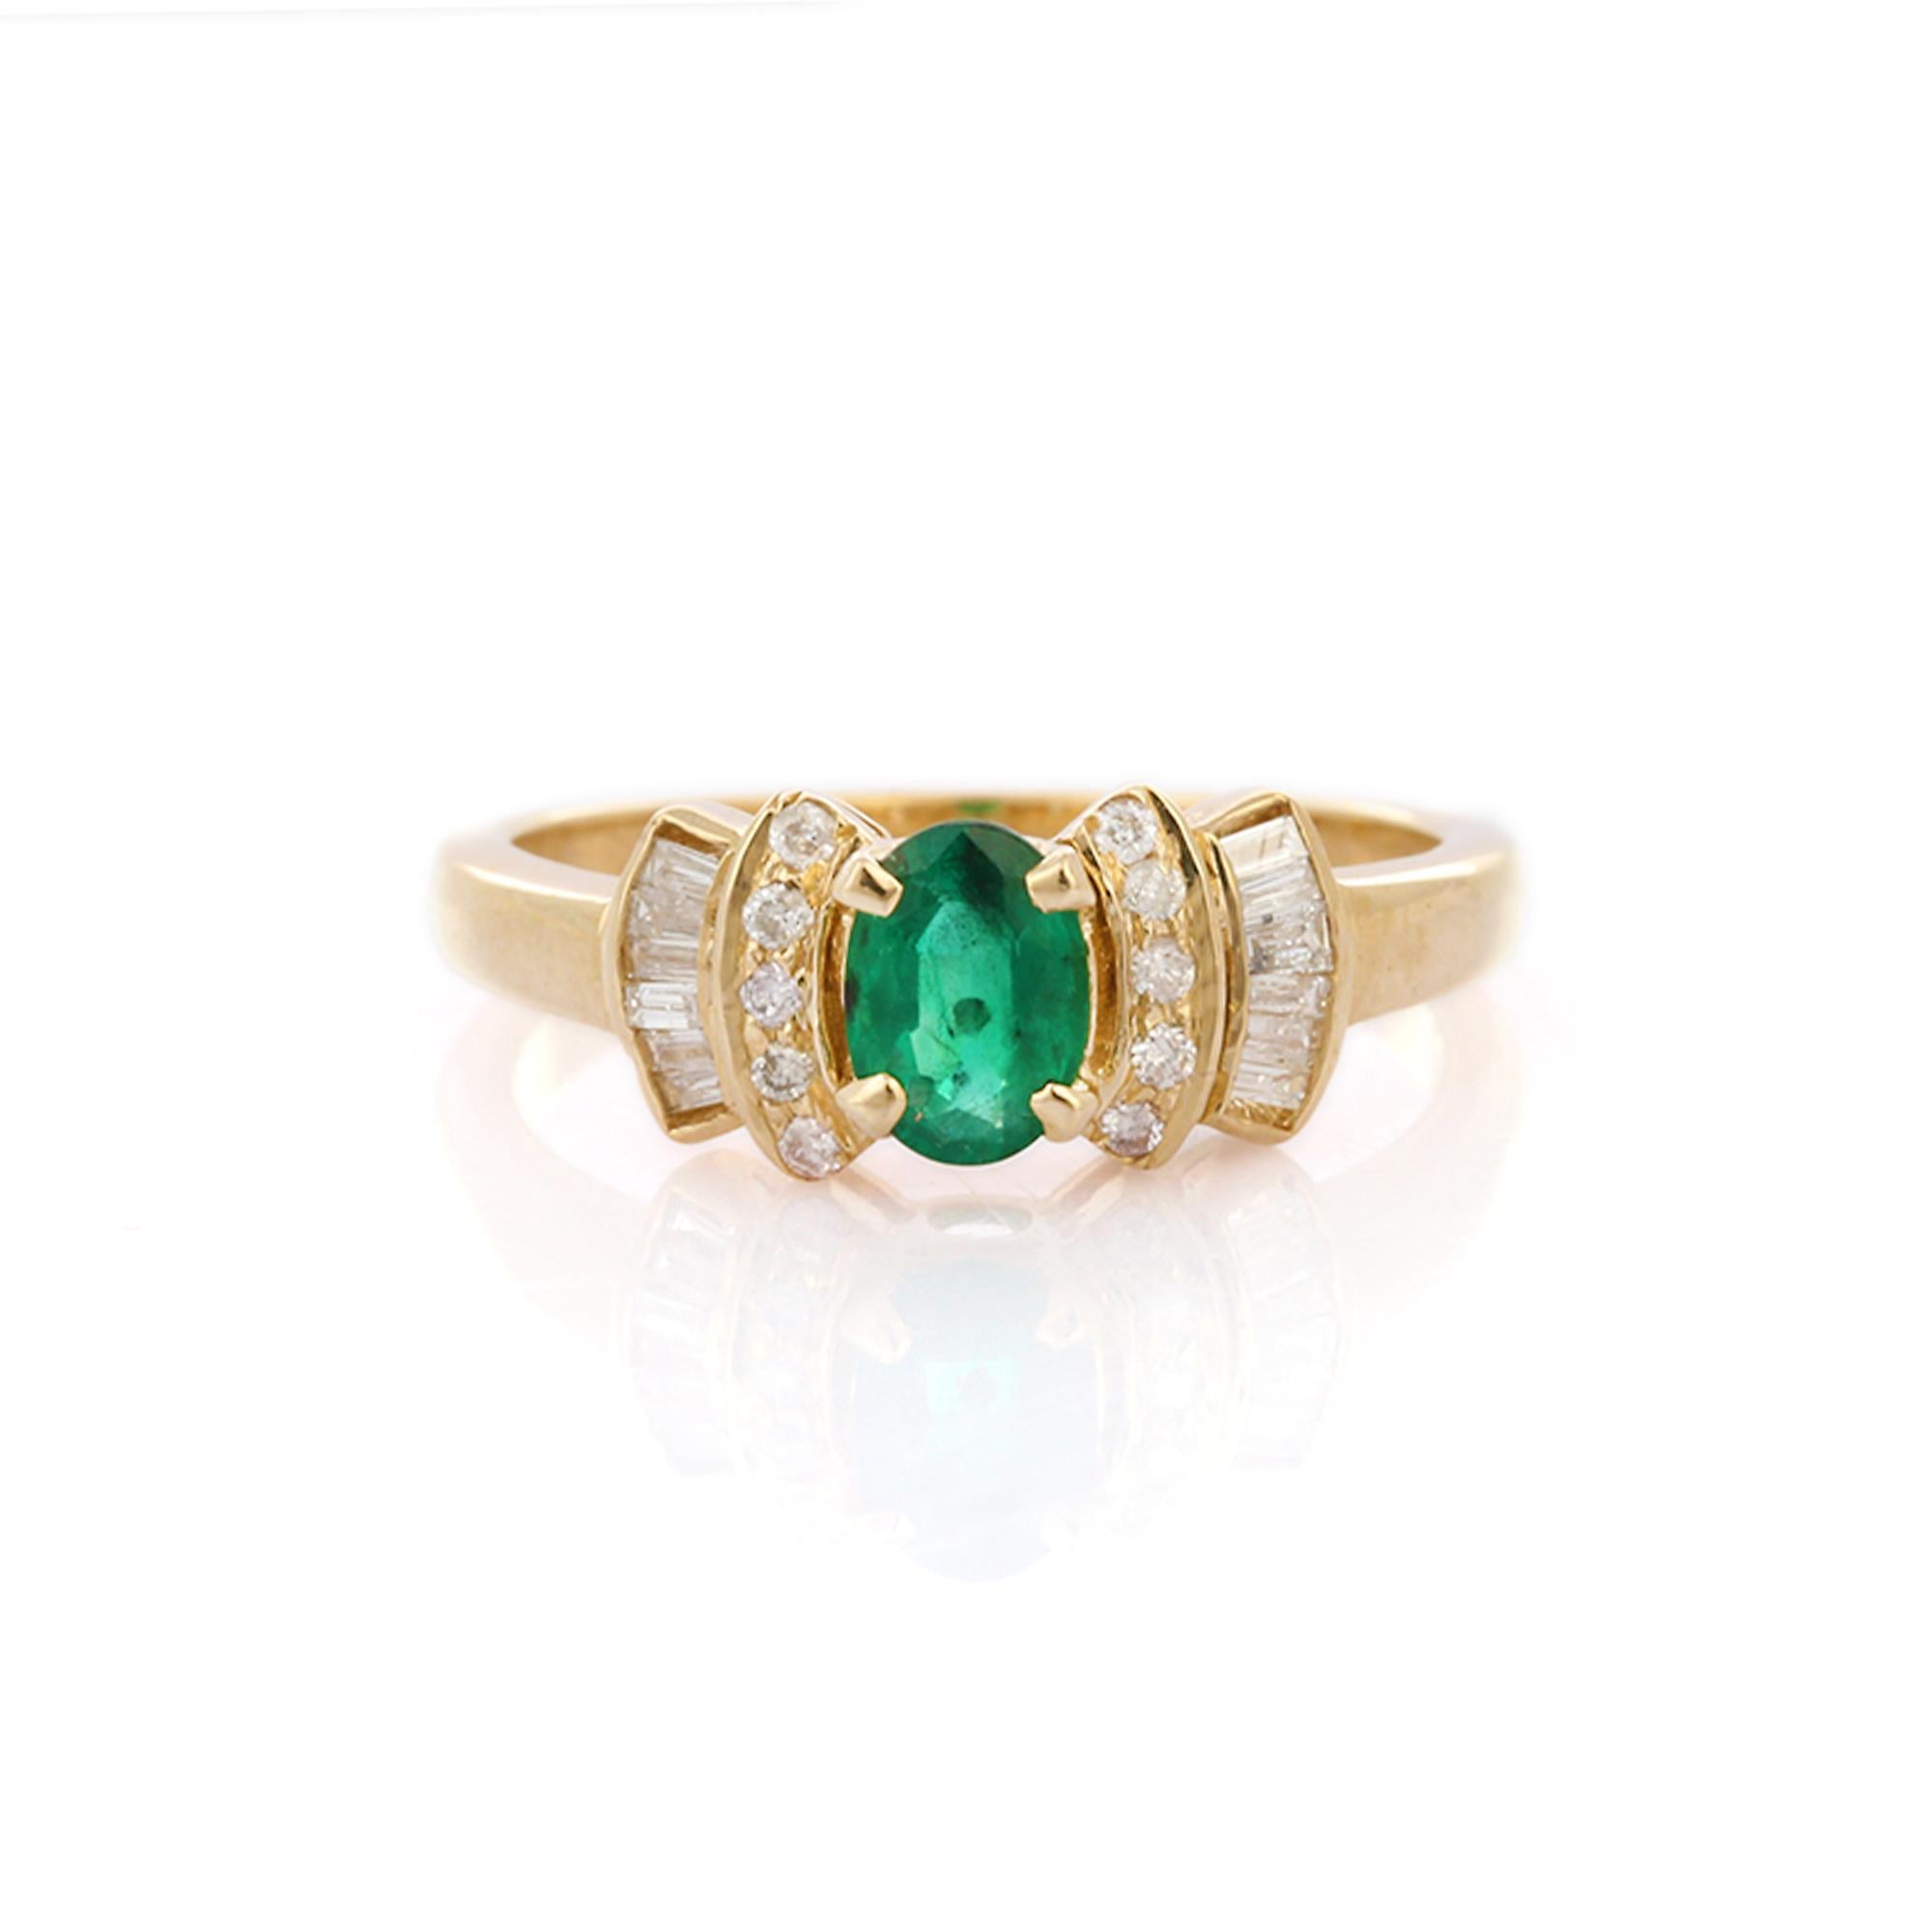 For Sale:  Vivid Green Emerald and Diamond Engagement Ring in 14K Yellow Gold for Her  7